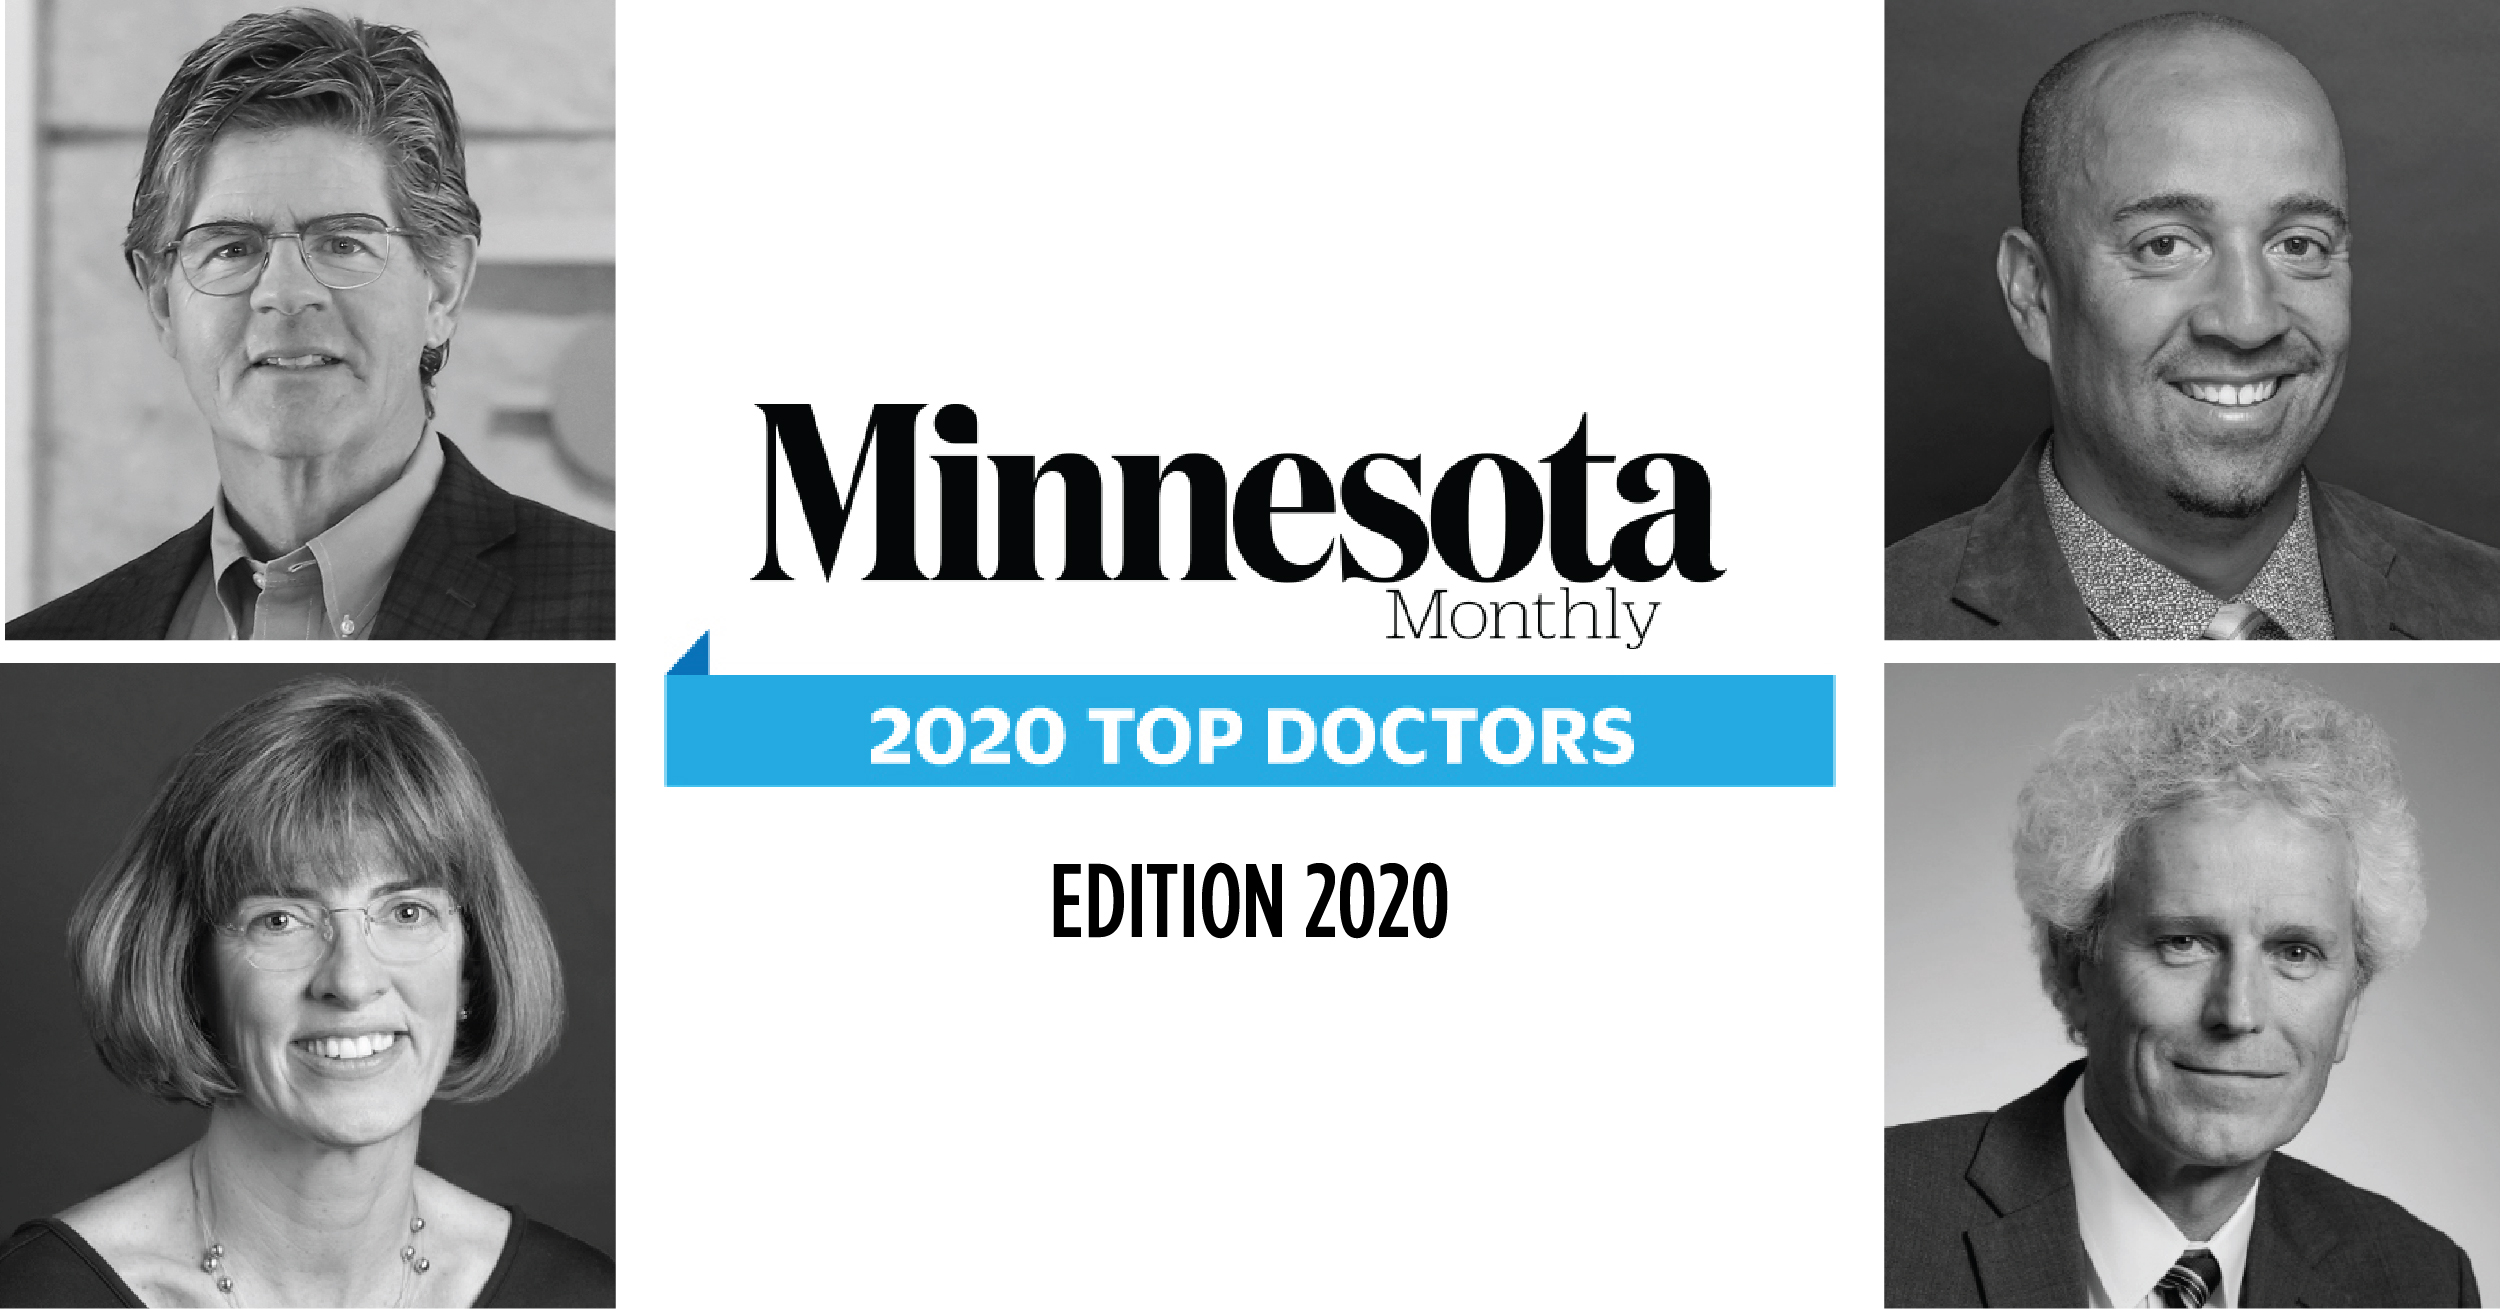 4 TCO physicians named to Minnesota Monthly’s 2020 Top Doctors list